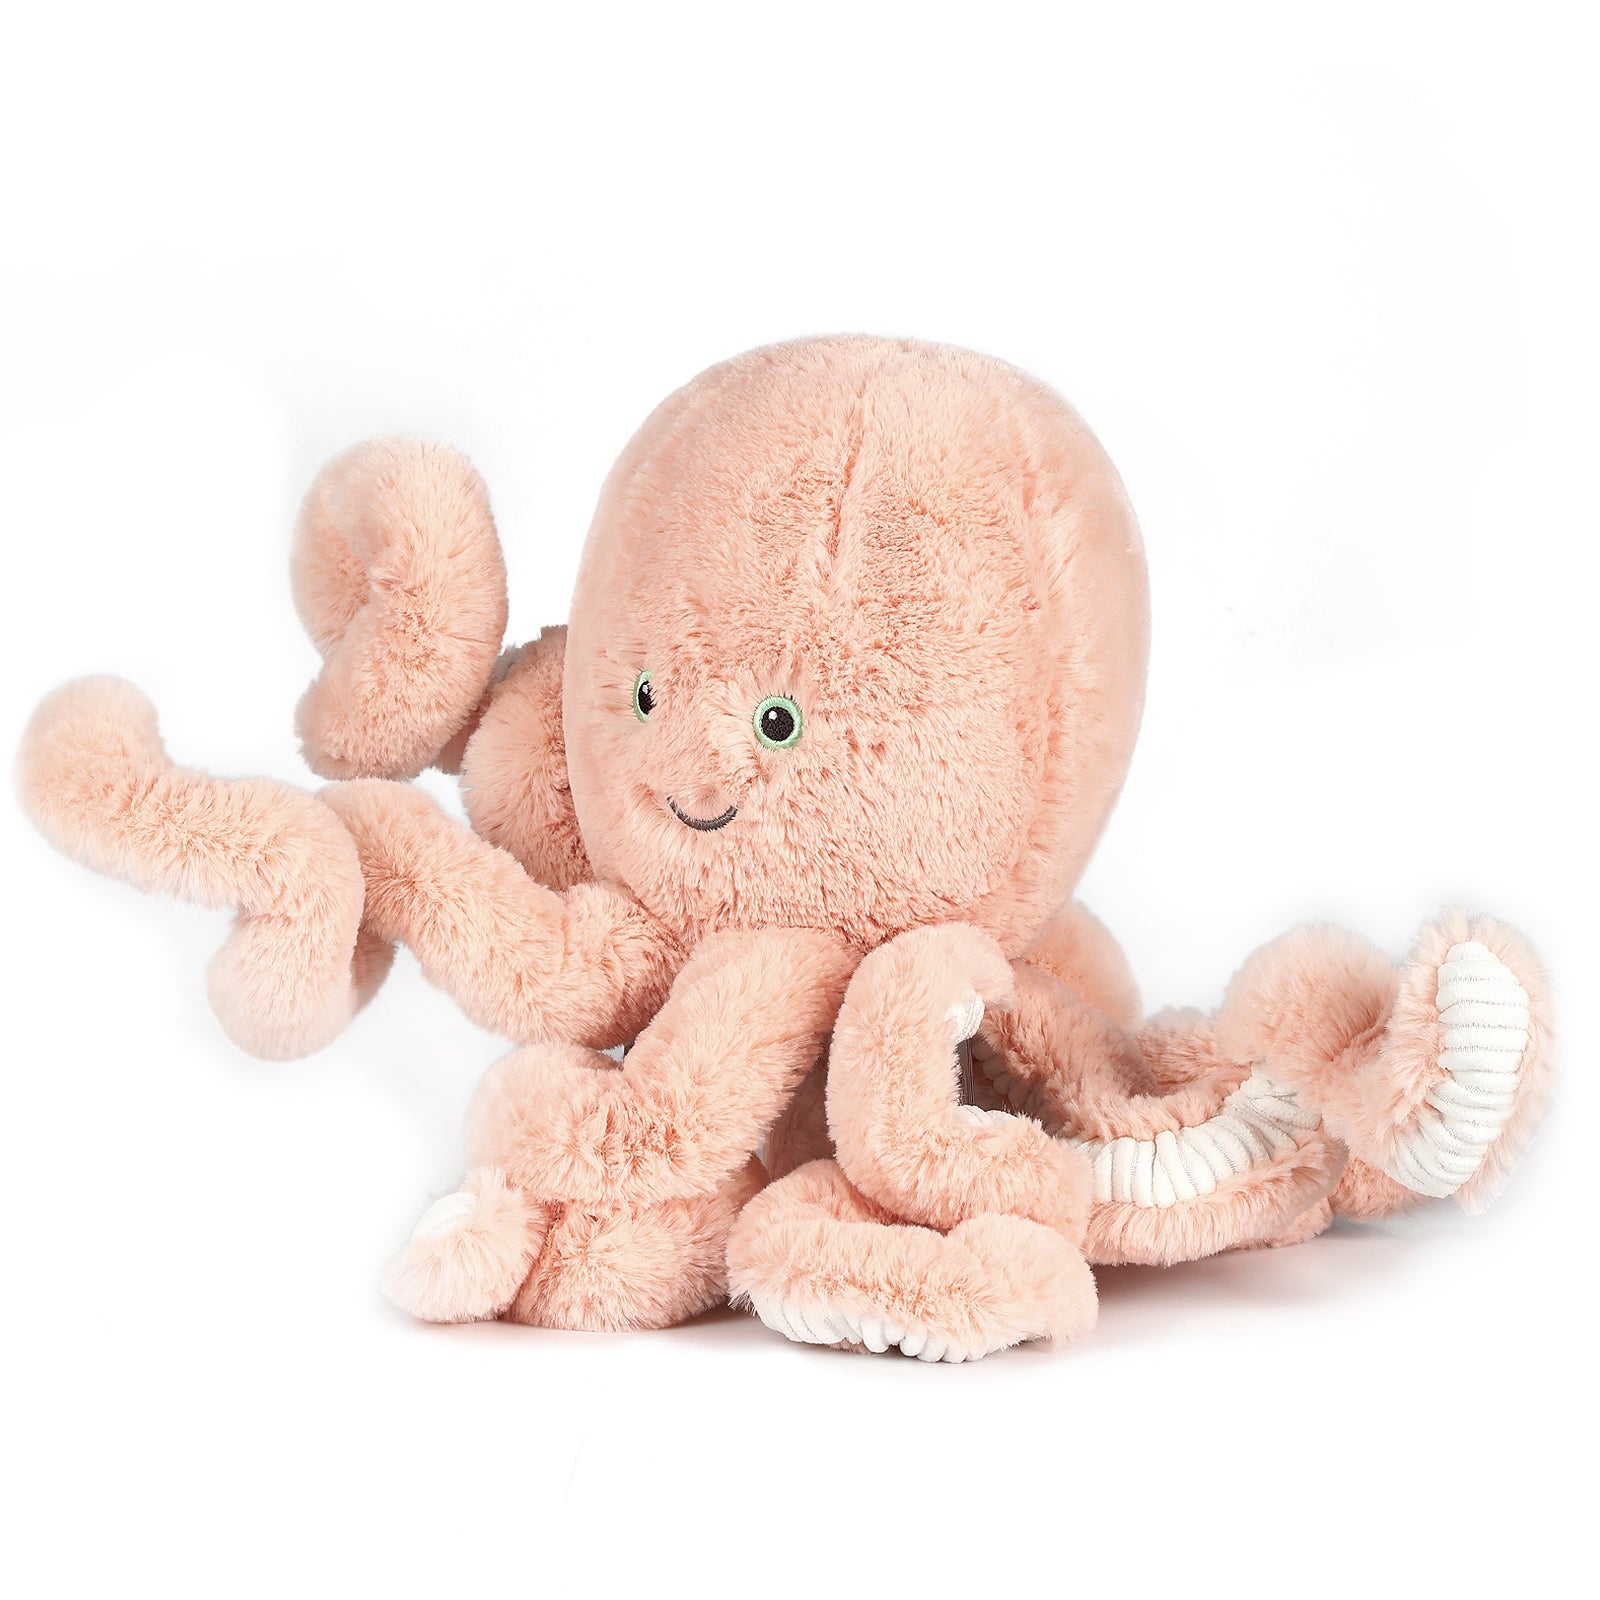 OB Designs Little Cove Octopus Soft Toy